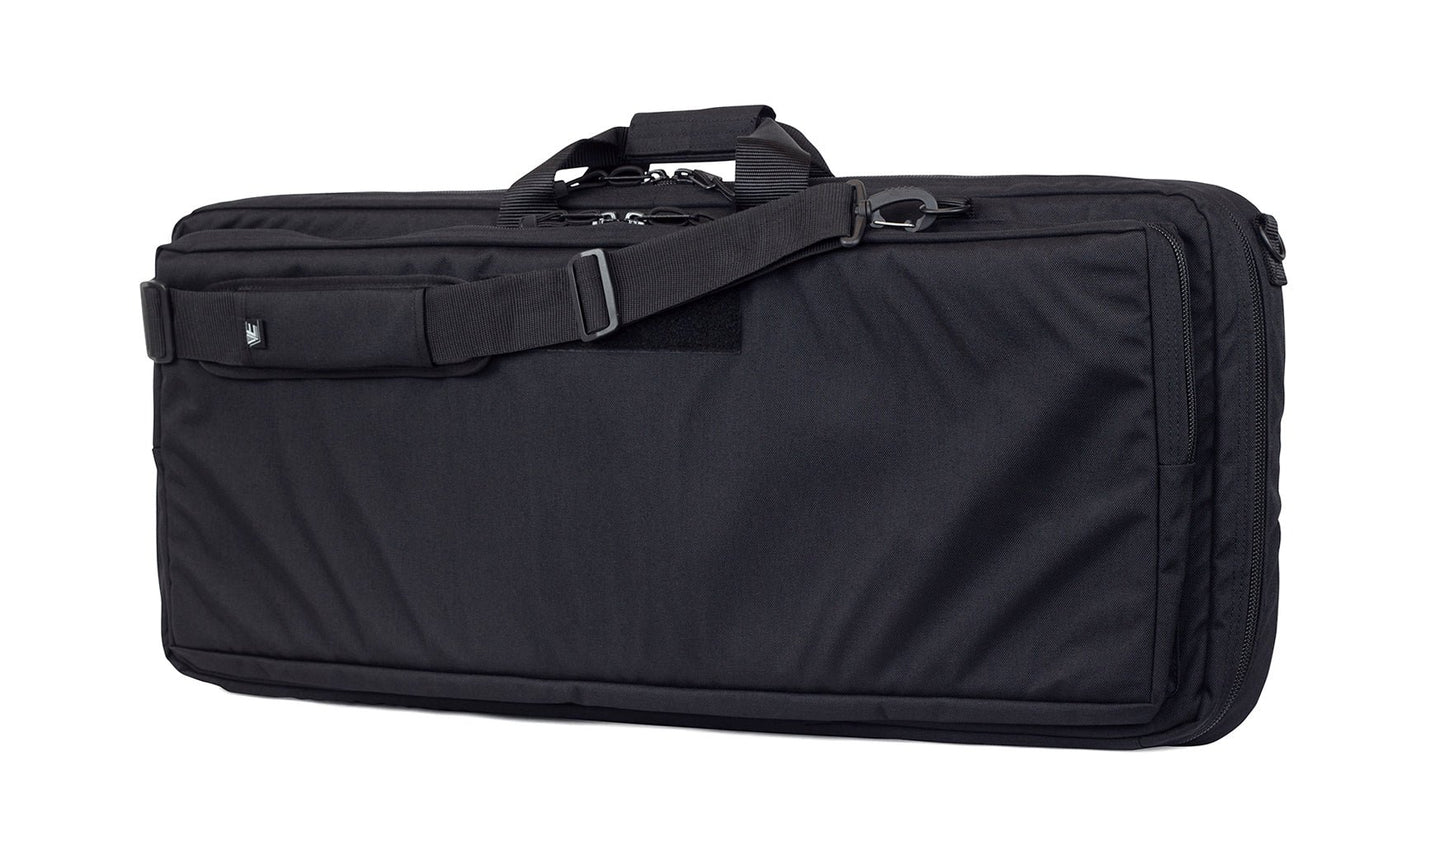 Elite Survival Systems - Covert Operations Discreet Rifle Case - Angler's Pro Tackle & Outdoors